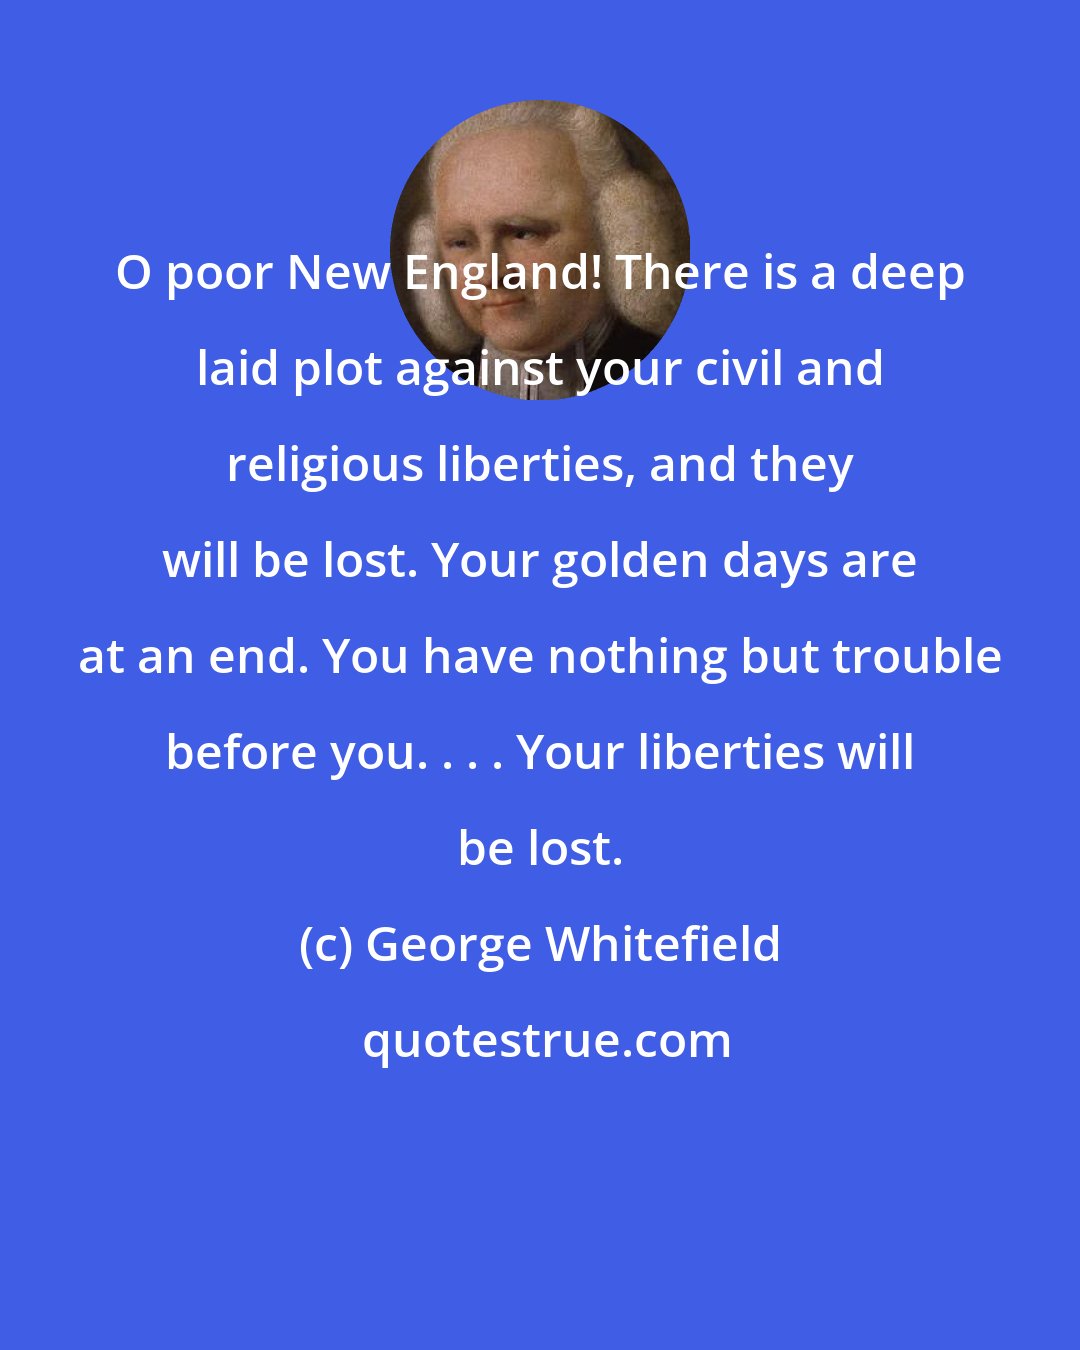 George Whitefield: O poor New England! There is a deep laid plot against your civil and religious liberties, and they will be lost. Your golden days are at an end. You have nothing but trouble before you. . . . Your liberties will be lost.